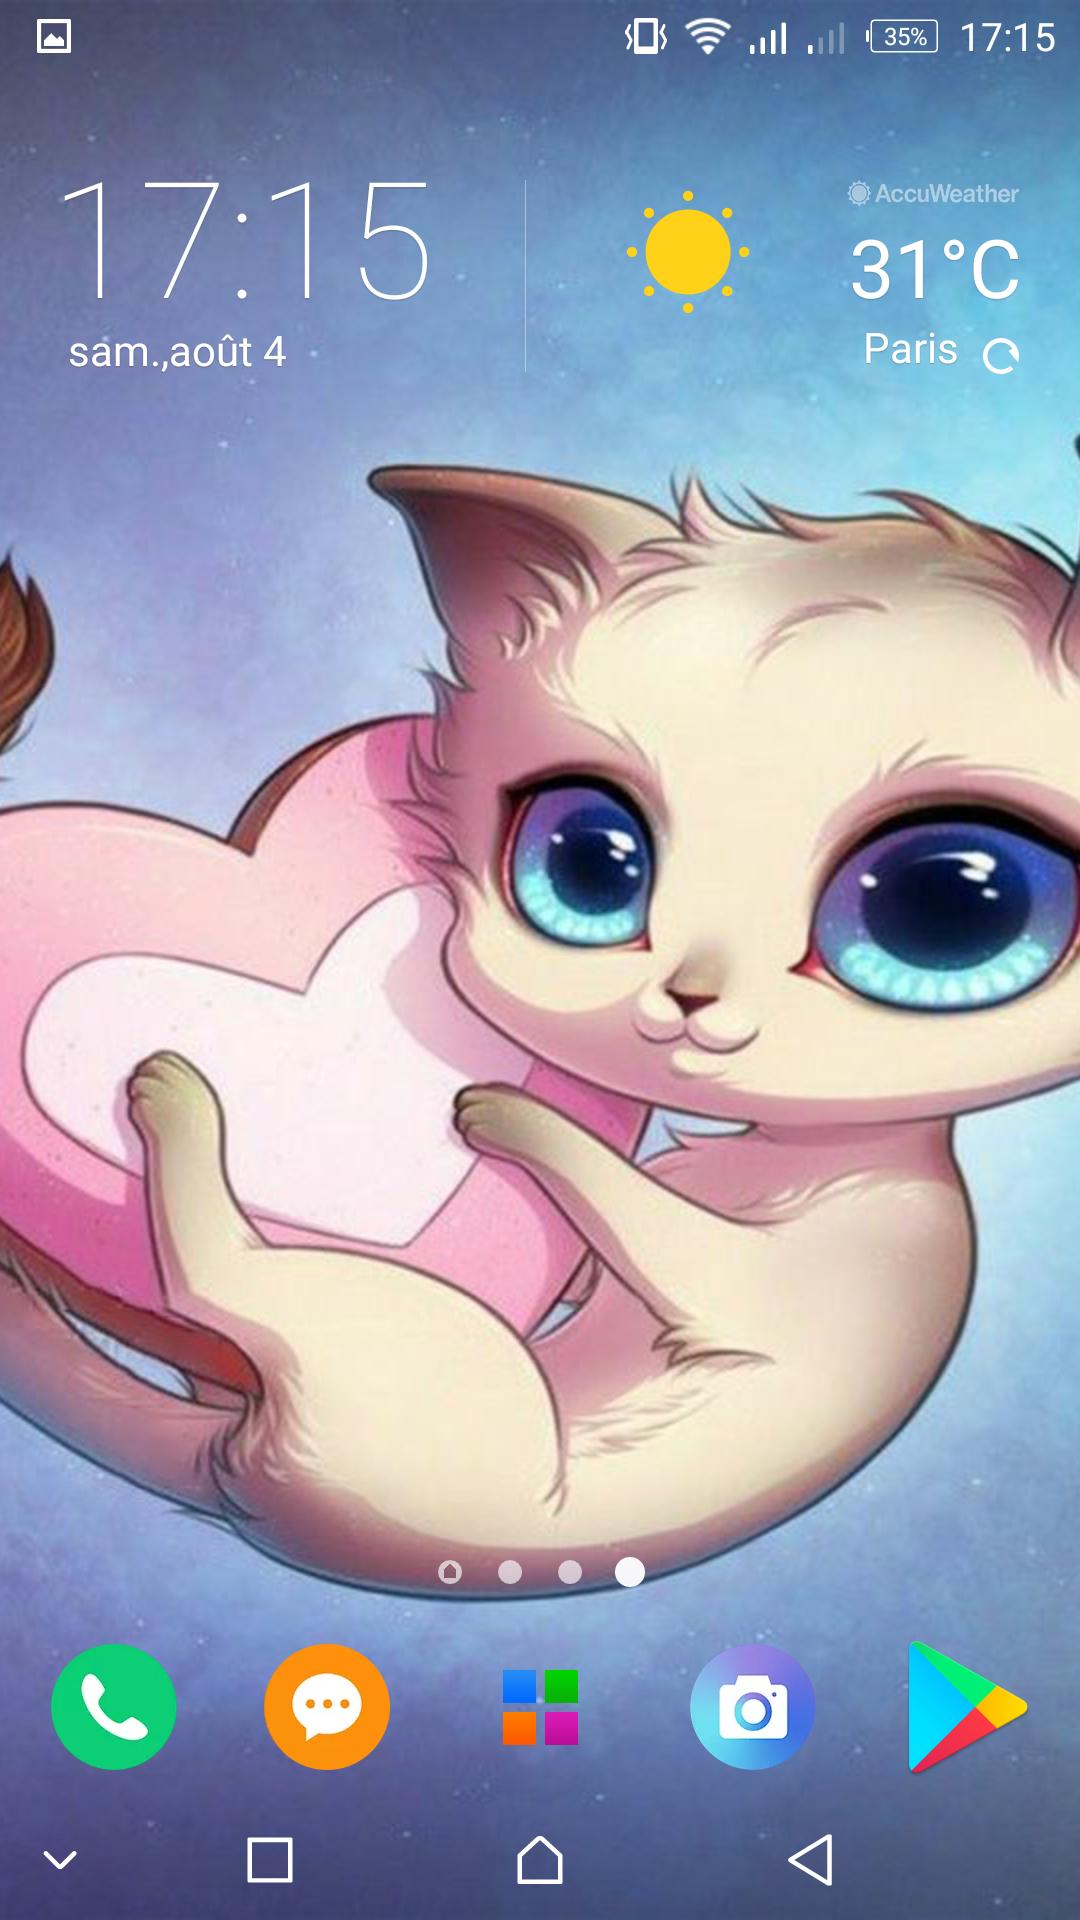 Kawaii Cats Wallpapers - Cute Backgrounds for Android - APK Download